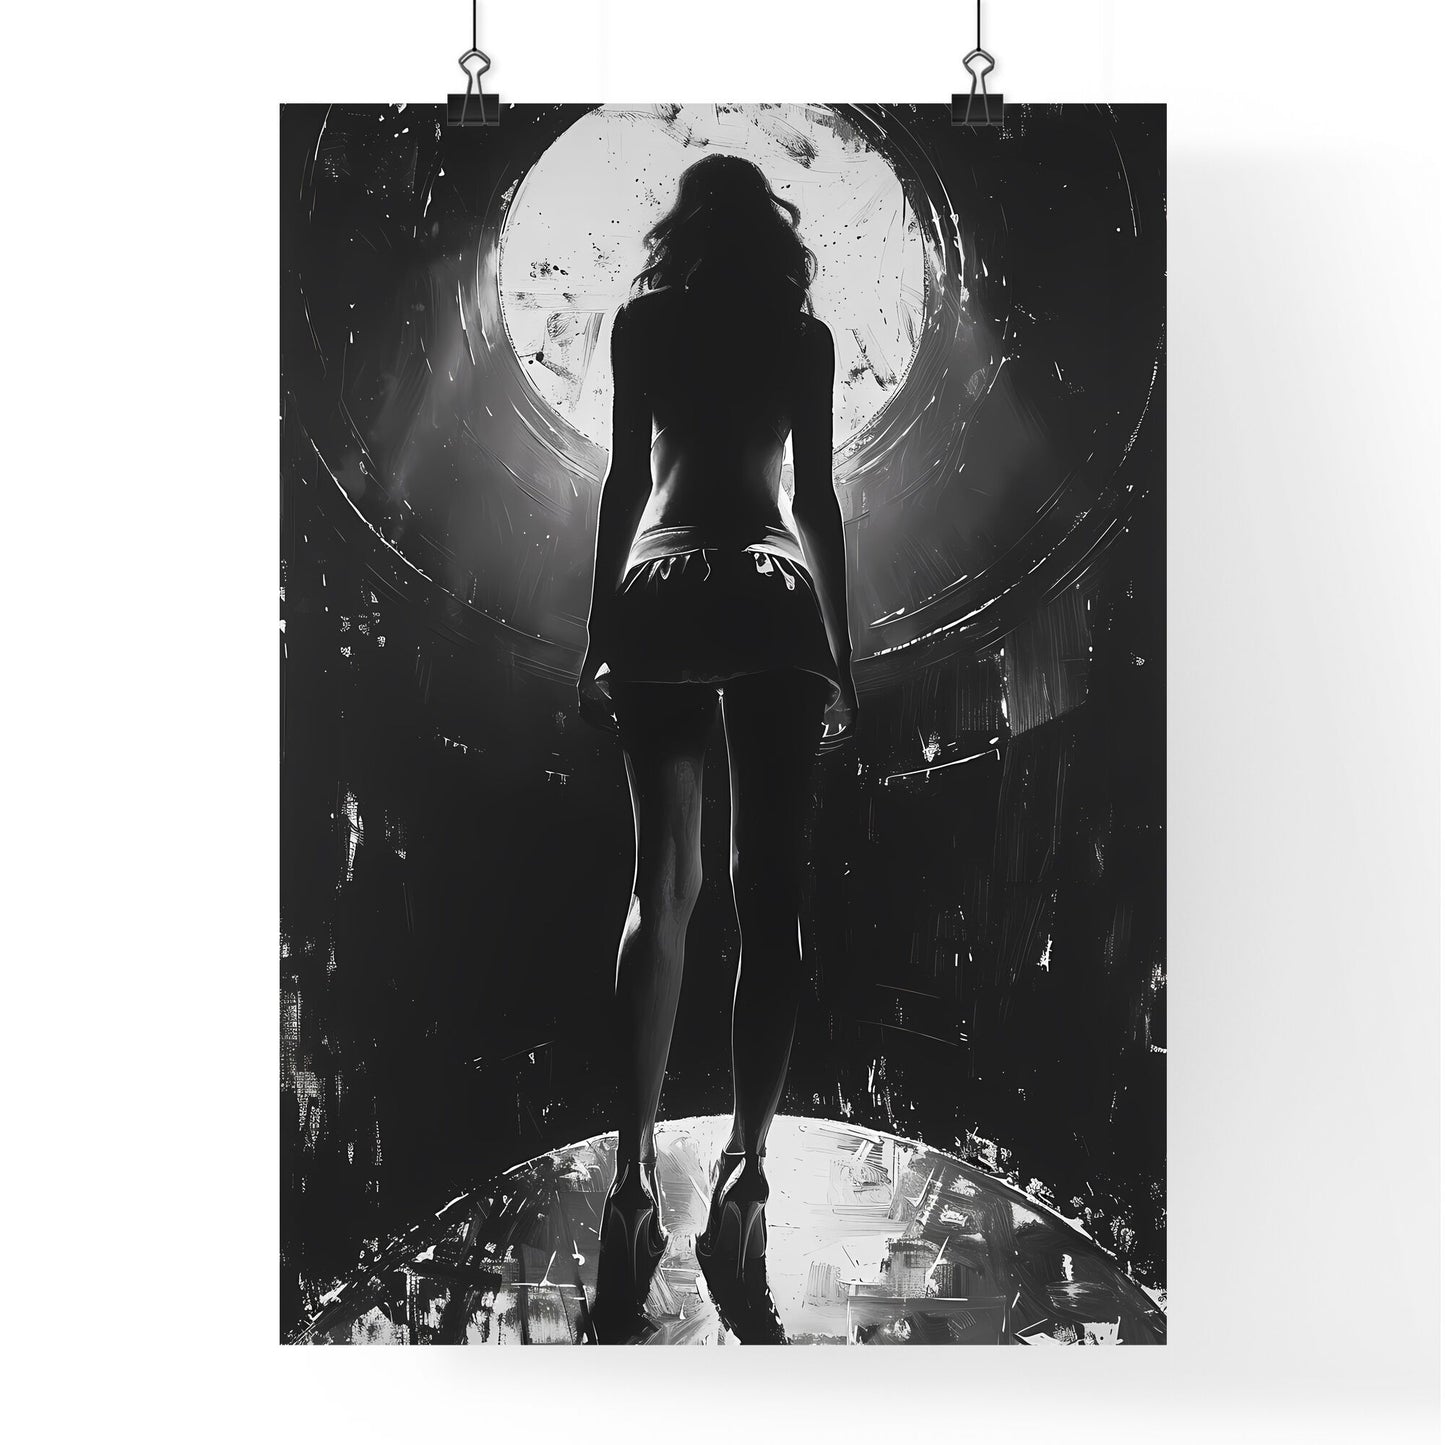 Enigmatic Femme Fatale: Noir-inspired Techno Club Scene with Dreamy Volumetric Lighting, showcasing Opulent 1940s Elegance and Vibrant Artistry Default Title